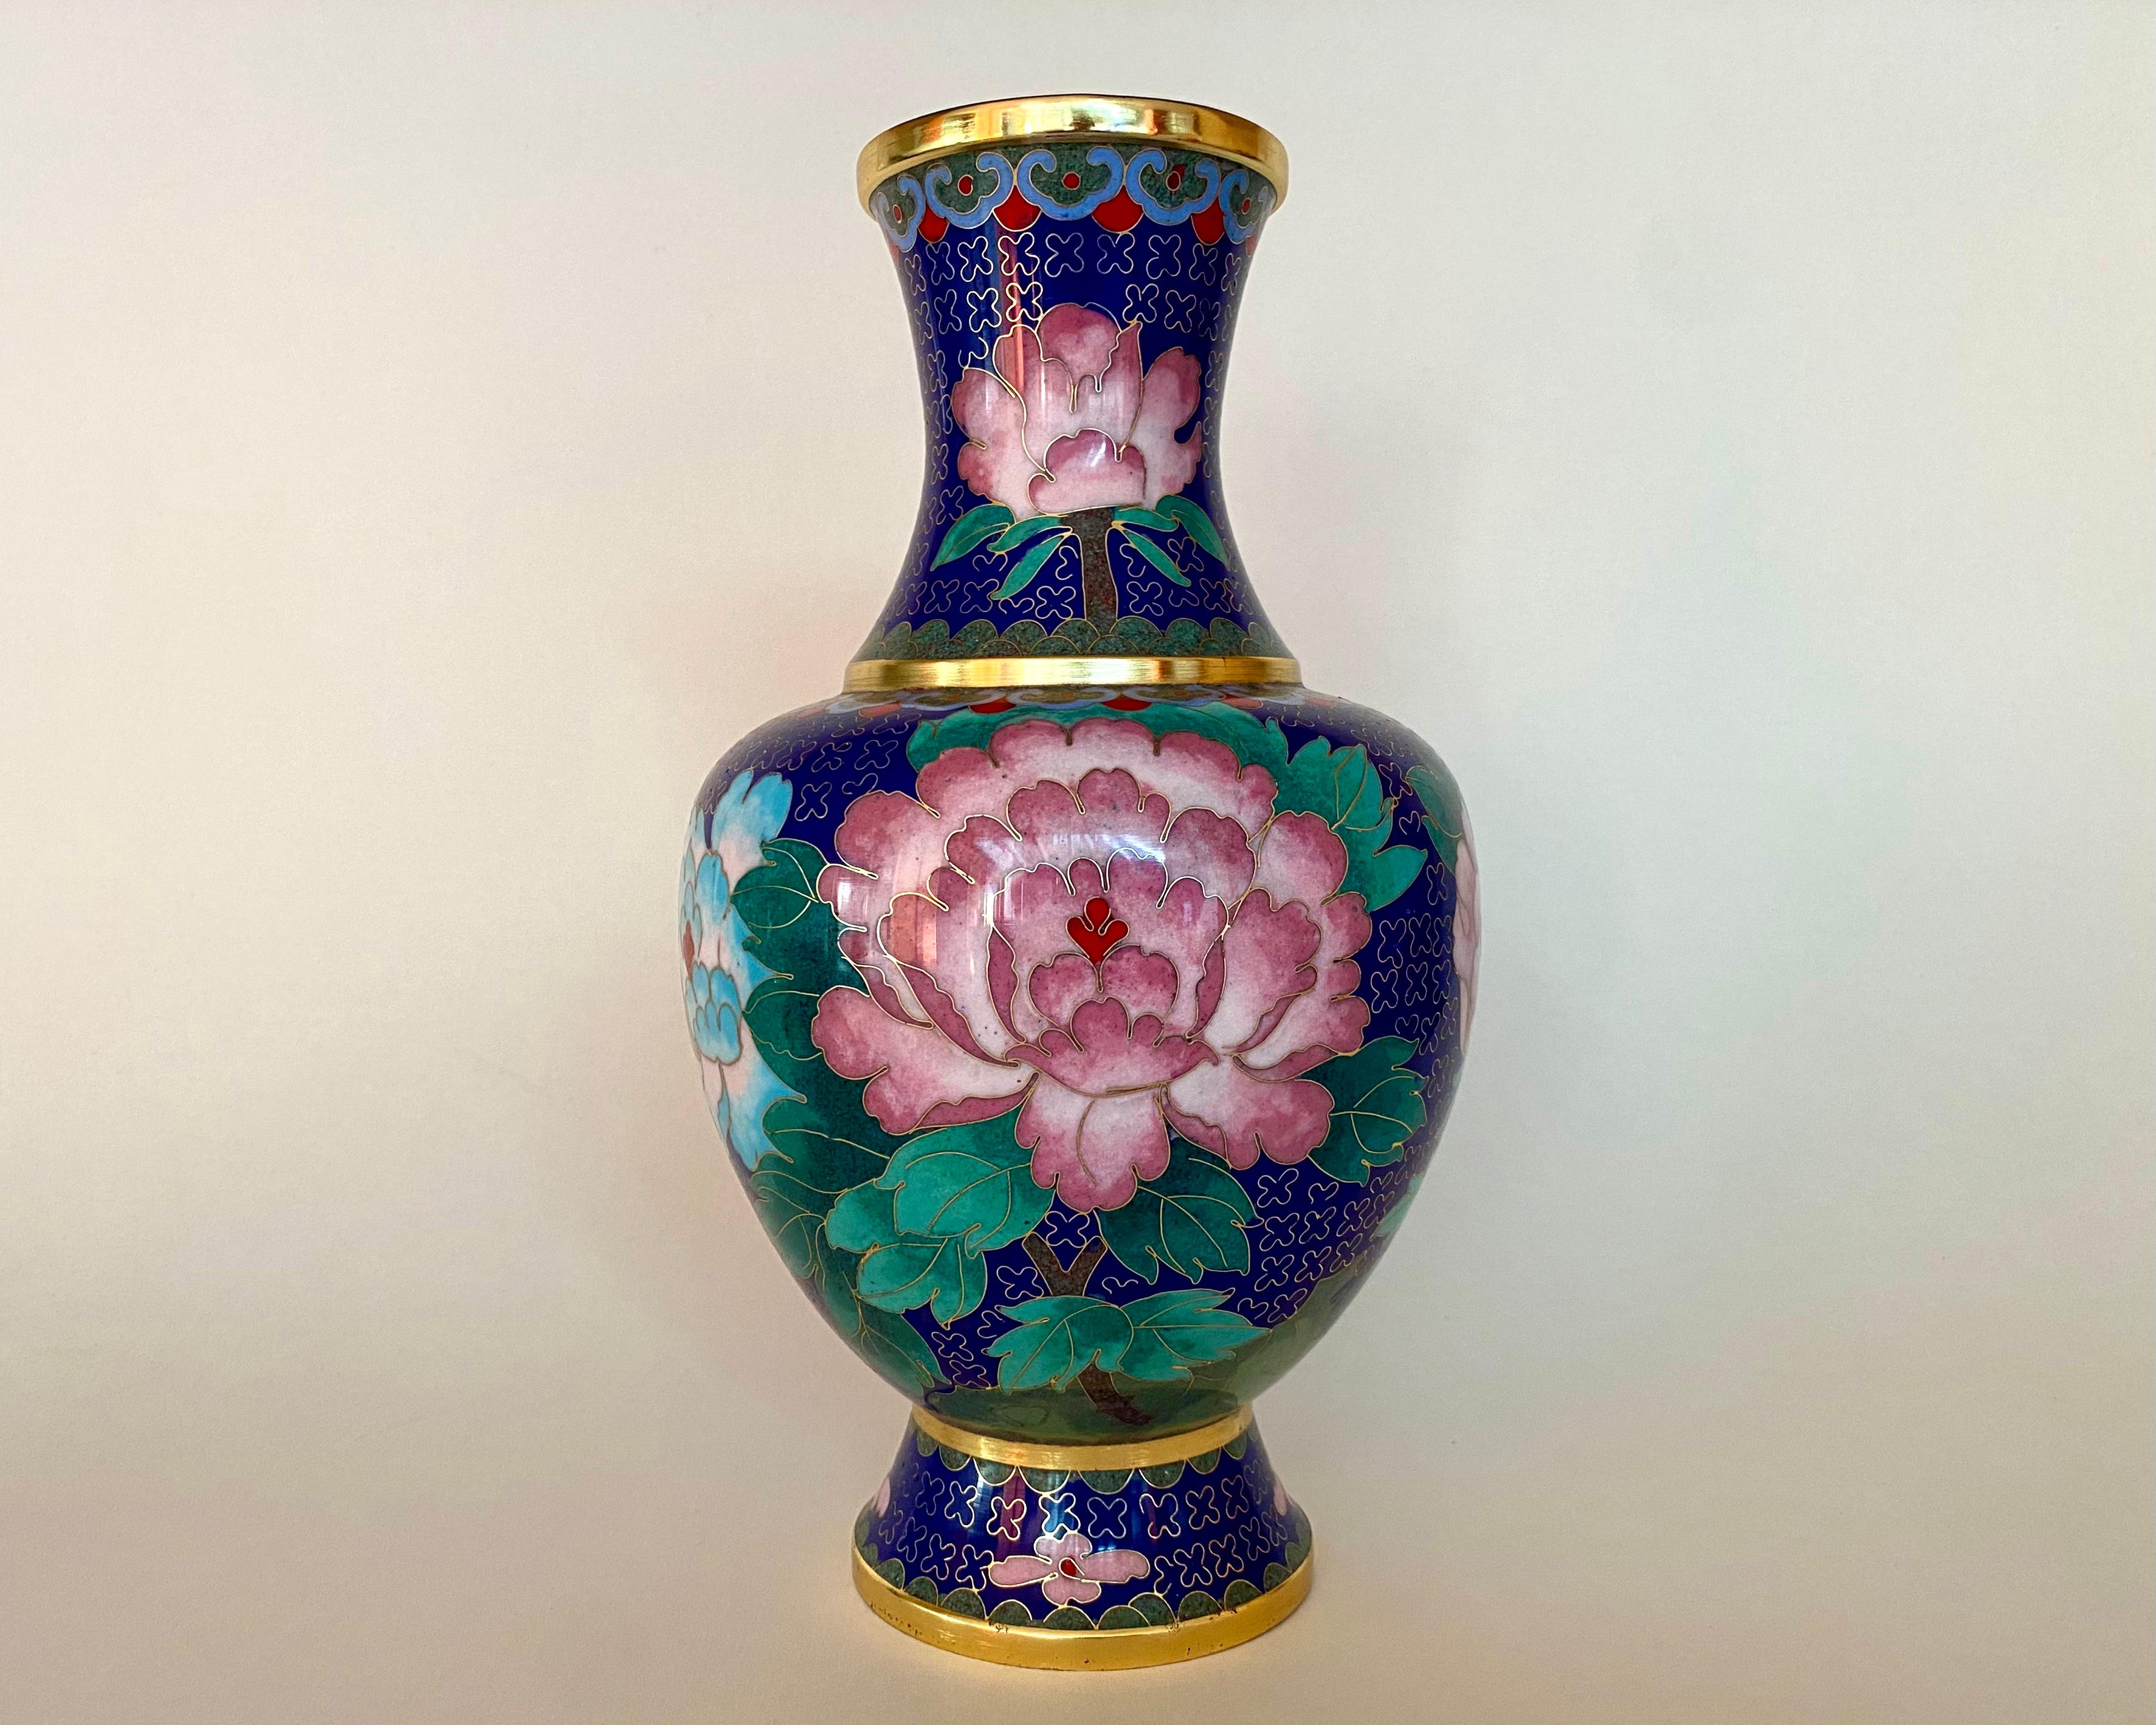 Amazing Chinese vase decorated with a multi-color painting depicting traditional flowers for oriental décor.

Created in China circa 1980s.

A subtle oriental ornament, inherent only in the cloisone technique, in combination with colorful